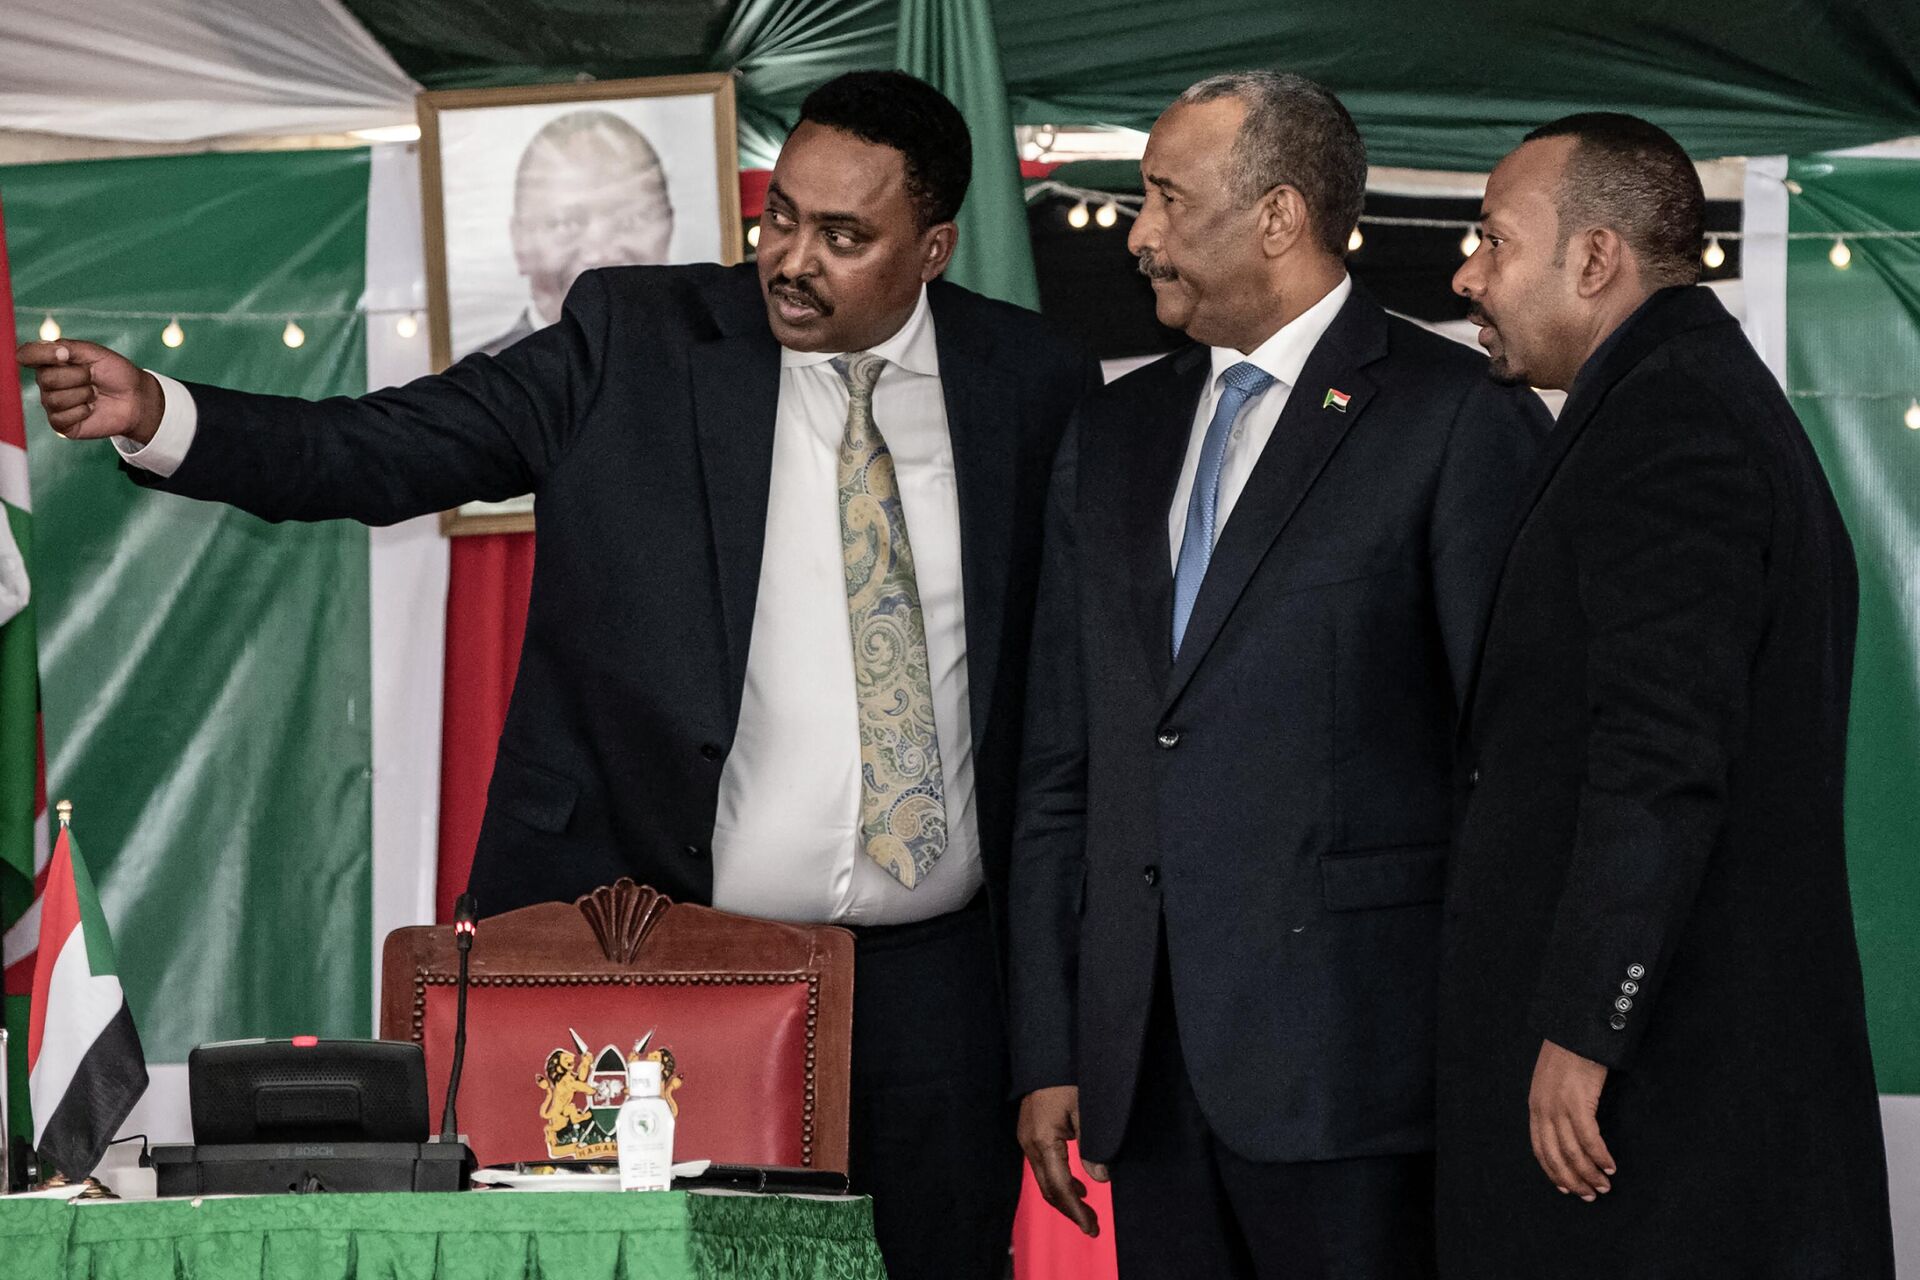 Executive Secretary of the Inter-Governmental Authority on Development (IGAD) and Ethiopia's Former Minister of Foreign Affairs Workneh Gebeyahu (L) gestures next to Sudan's President of the Transitional Sovereignty Council Abdel Fattah al-Burhan (C) and Ethiopia President Abiy Ahmed (R) during the 39th IGAD extraordinary summit in Nairobi on July 5, 2022. - Sputnik International, 1920, 24.08.2022